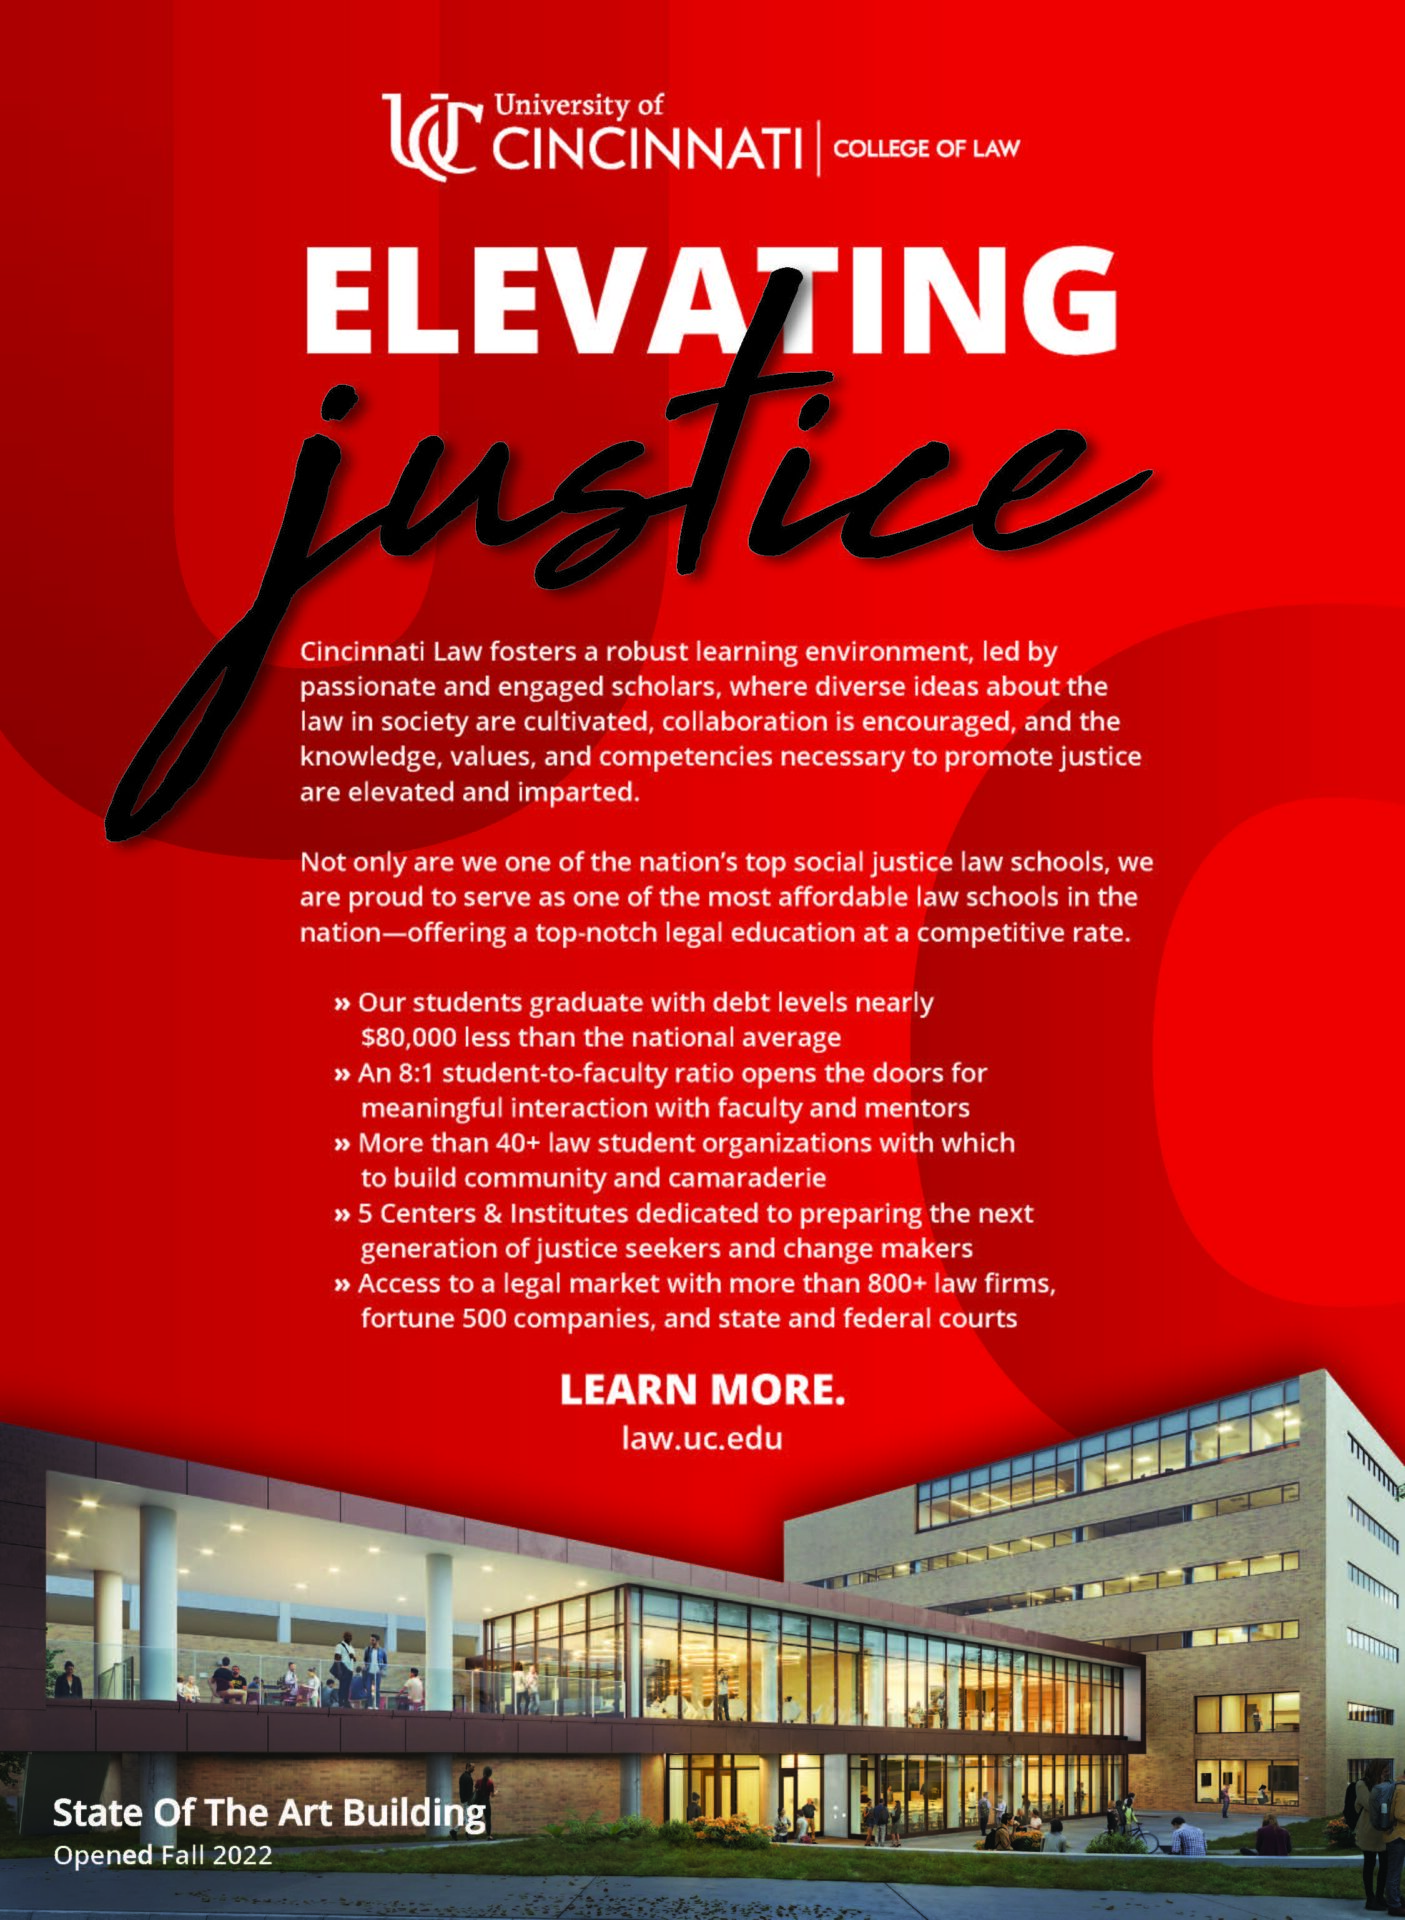 University of Cincinnati College of Law Elevating Justice Cincinnati Law fosters a robust learning environment, led by passionate ad engaged scholars, where diverse ideas about the law in society are cultivated, collaboration is encouraged, and the knowledge, values, and competencies necessary to promote justice are elevated and imparted. Not only are we one of the nation's top social justice law schools, we are proud to serve as one of the most affordable law schools in the nation- offering a top notch legal education at a competitive rate. -Our students graduate with debt levels nearly $30,000 less than the national average -An 8:1 student to faculty ratio opens the doors for meaningful interaction with faculty and mentors -More than 40+ law student organizations with which to build community and camaraderie -5 Centers & Institutes dedicated to preparing the next generation of justice seekers and change makers -Access to a legal market with more than 800+ law firms, fortune 500 companies, and state and federal courts. Learn More. law.uc.edu